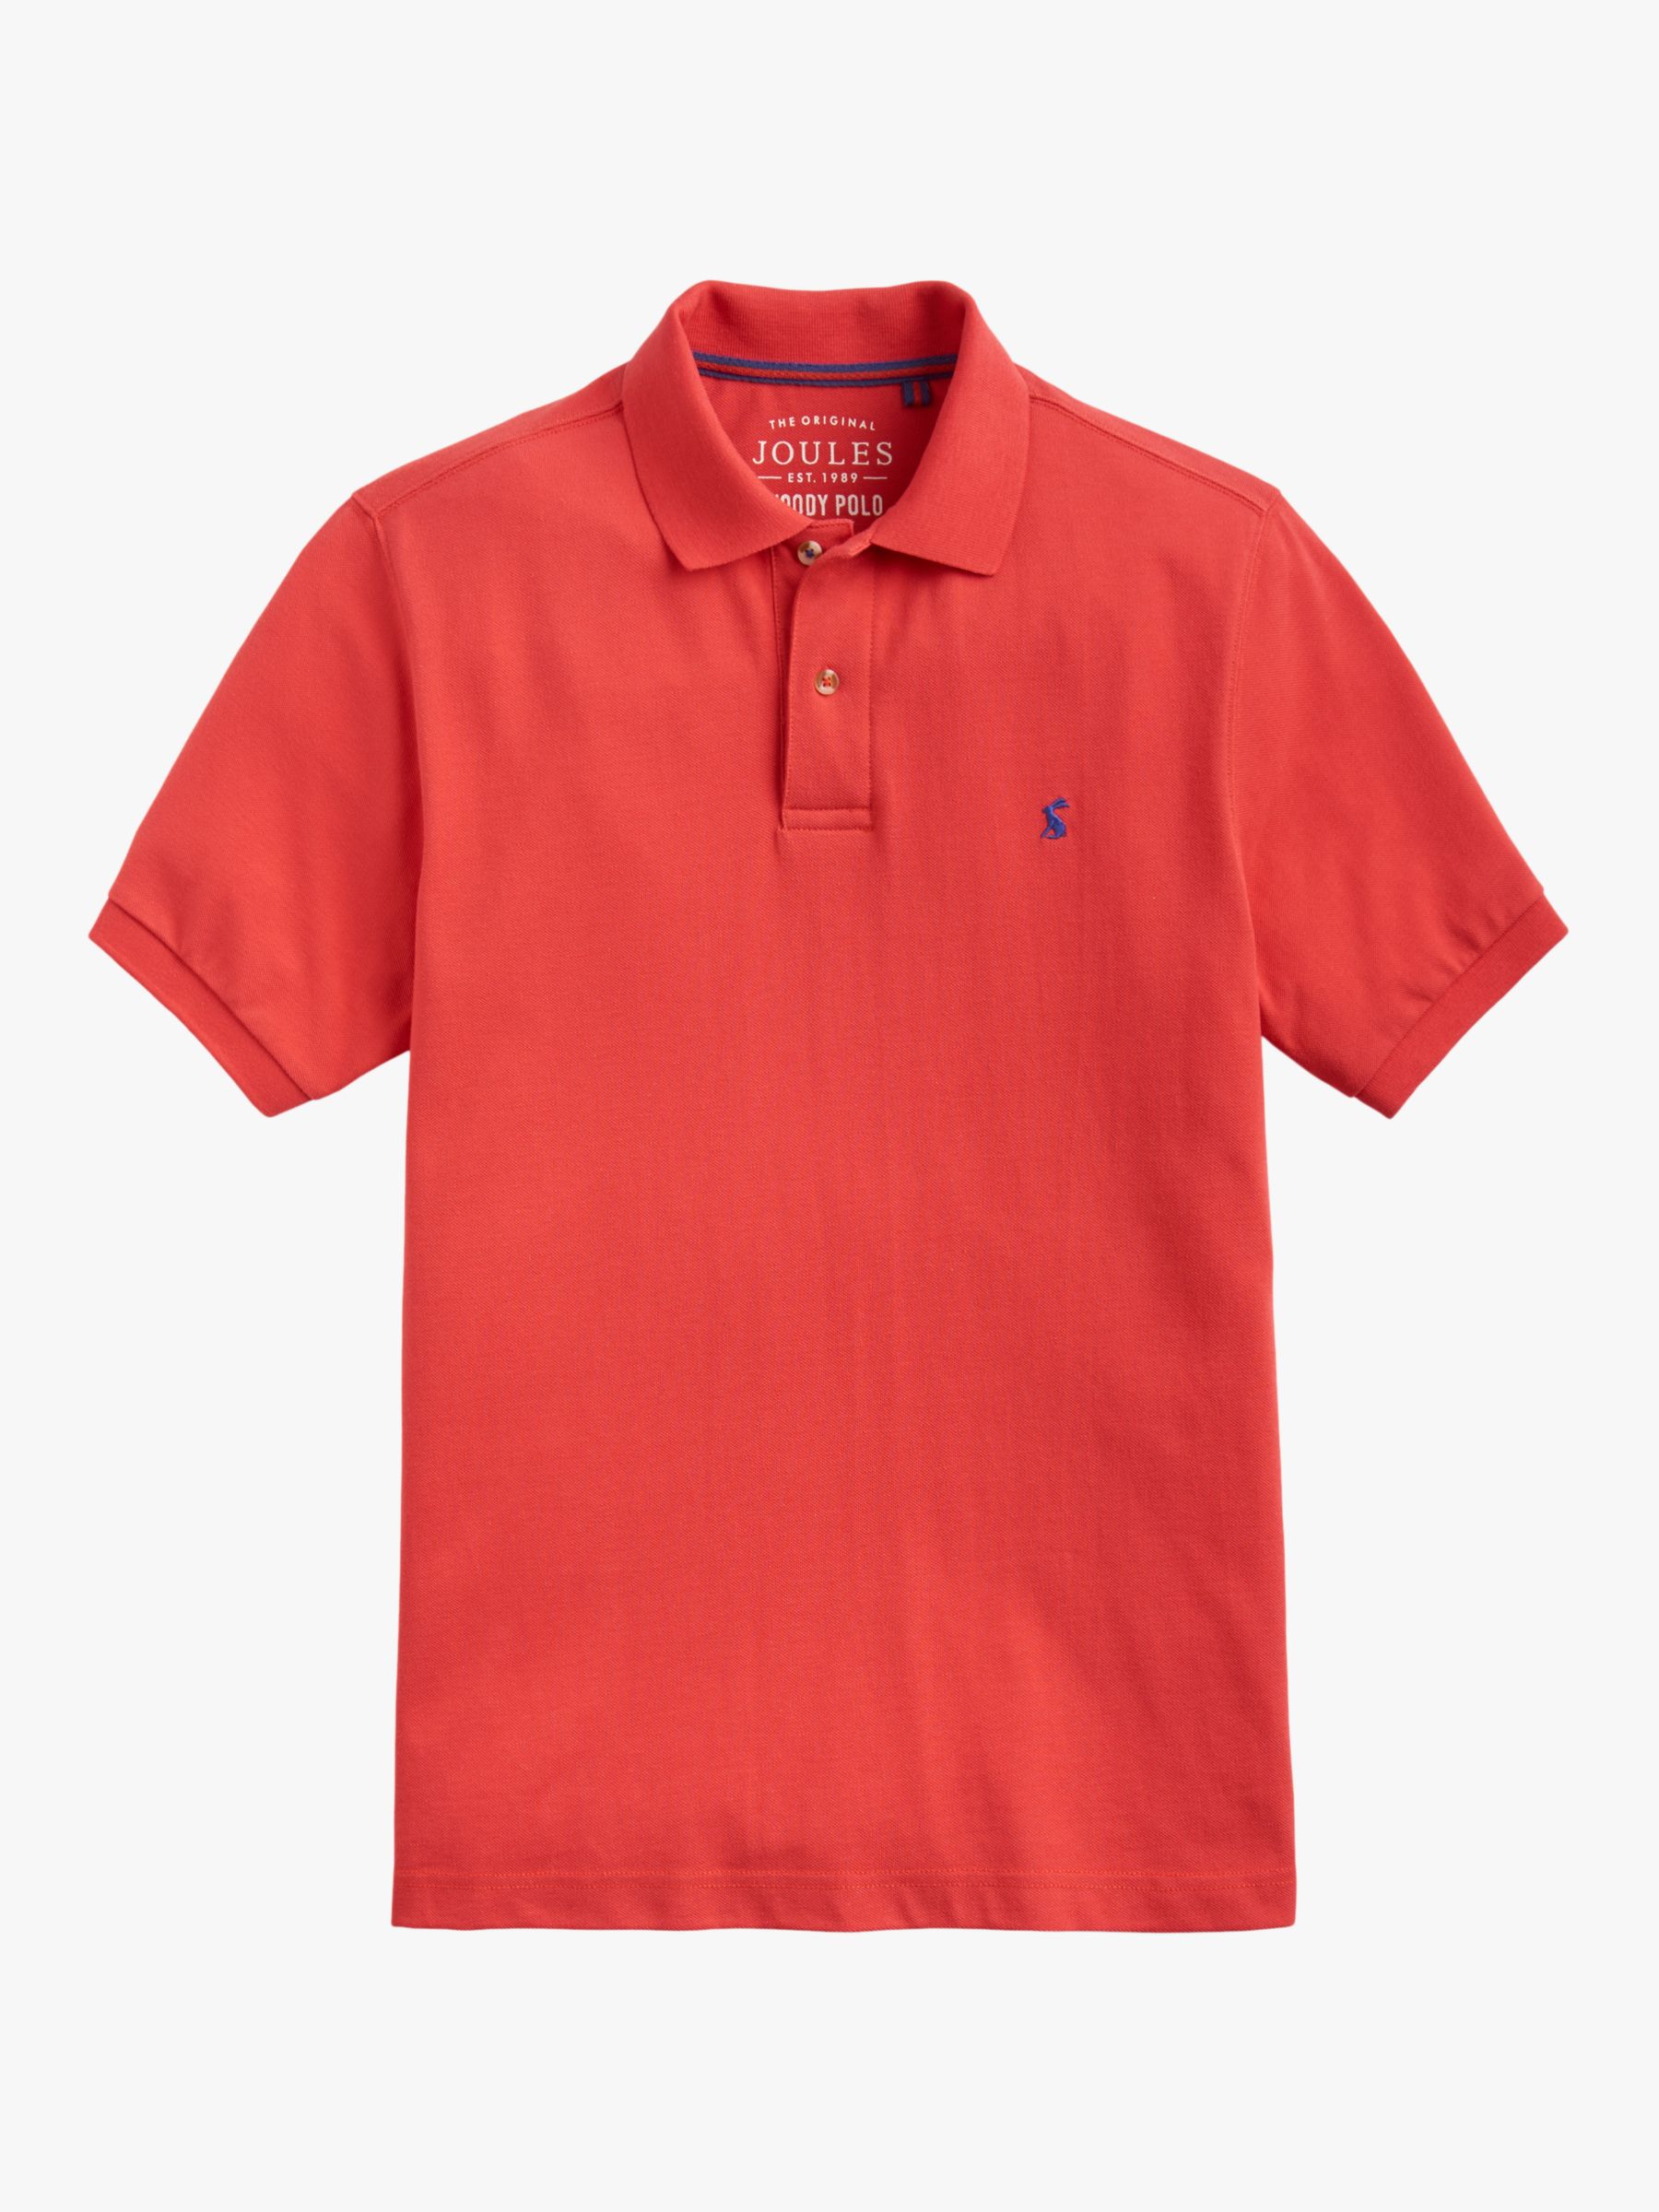 Joules Woody Classic Polo Shirt, Red at John Lewis & Partners